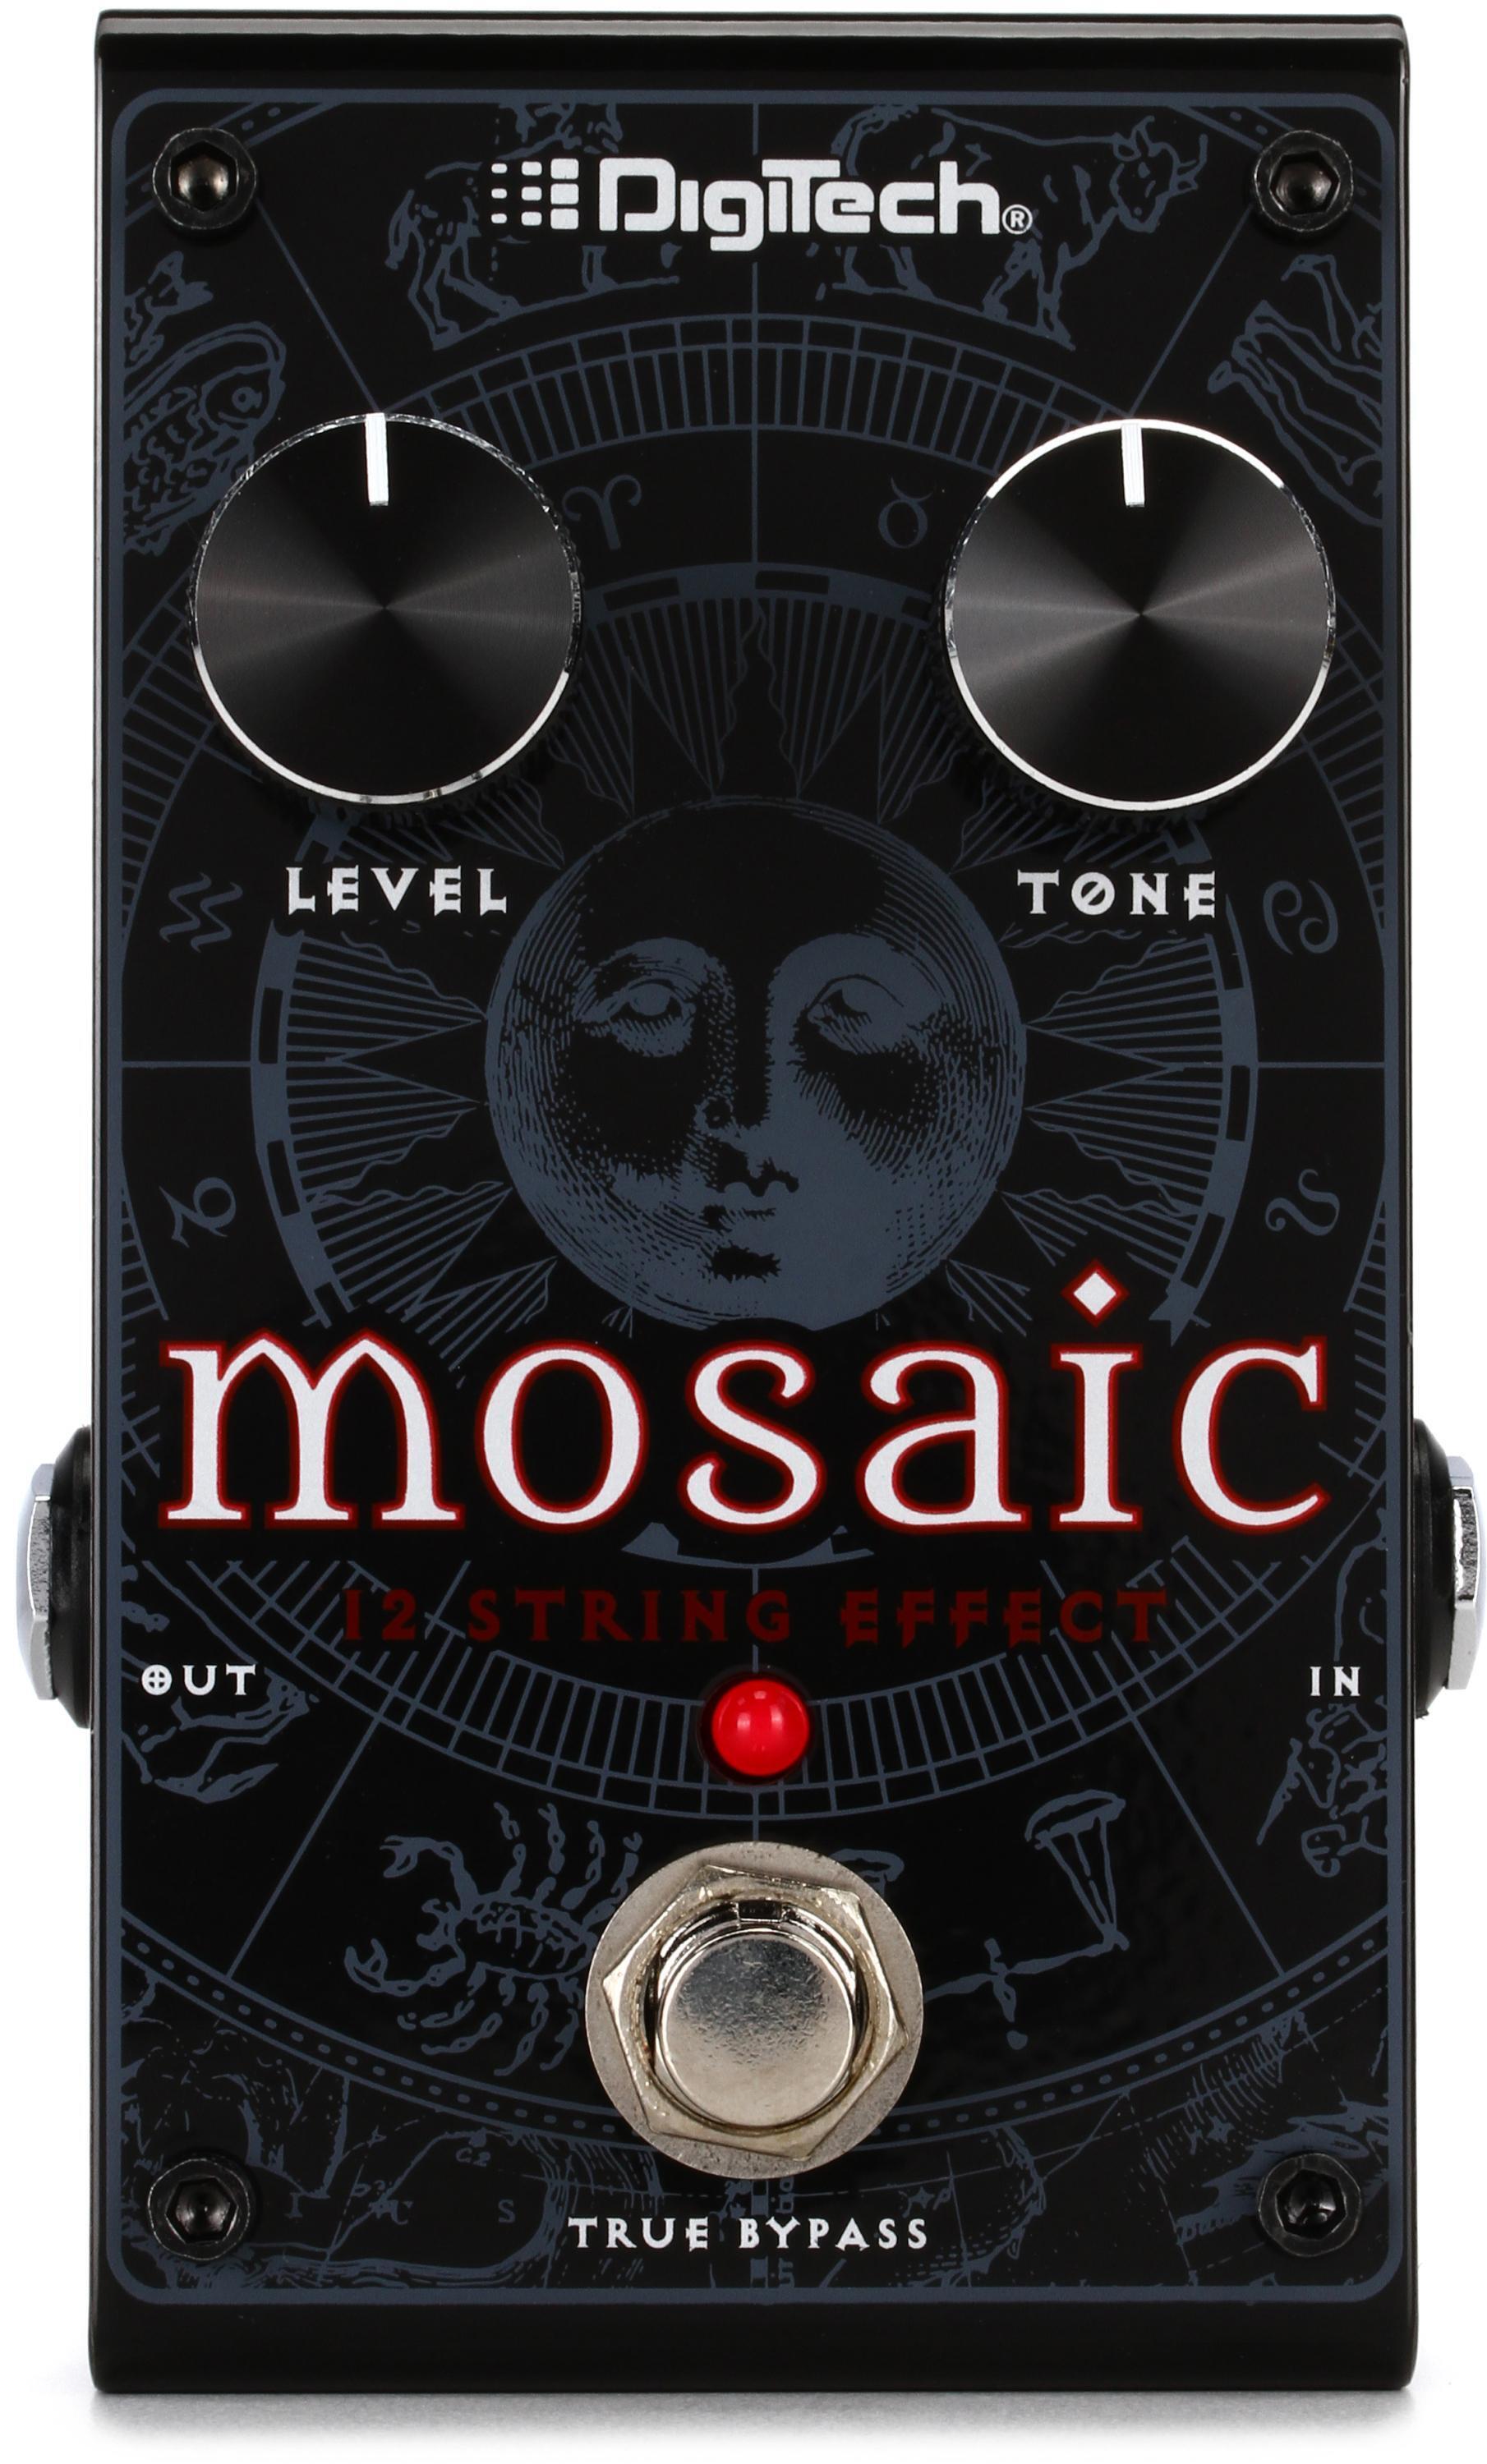 DigiTech Mosaic Polyphonic 12-string Effect Pedal | Sweetwater